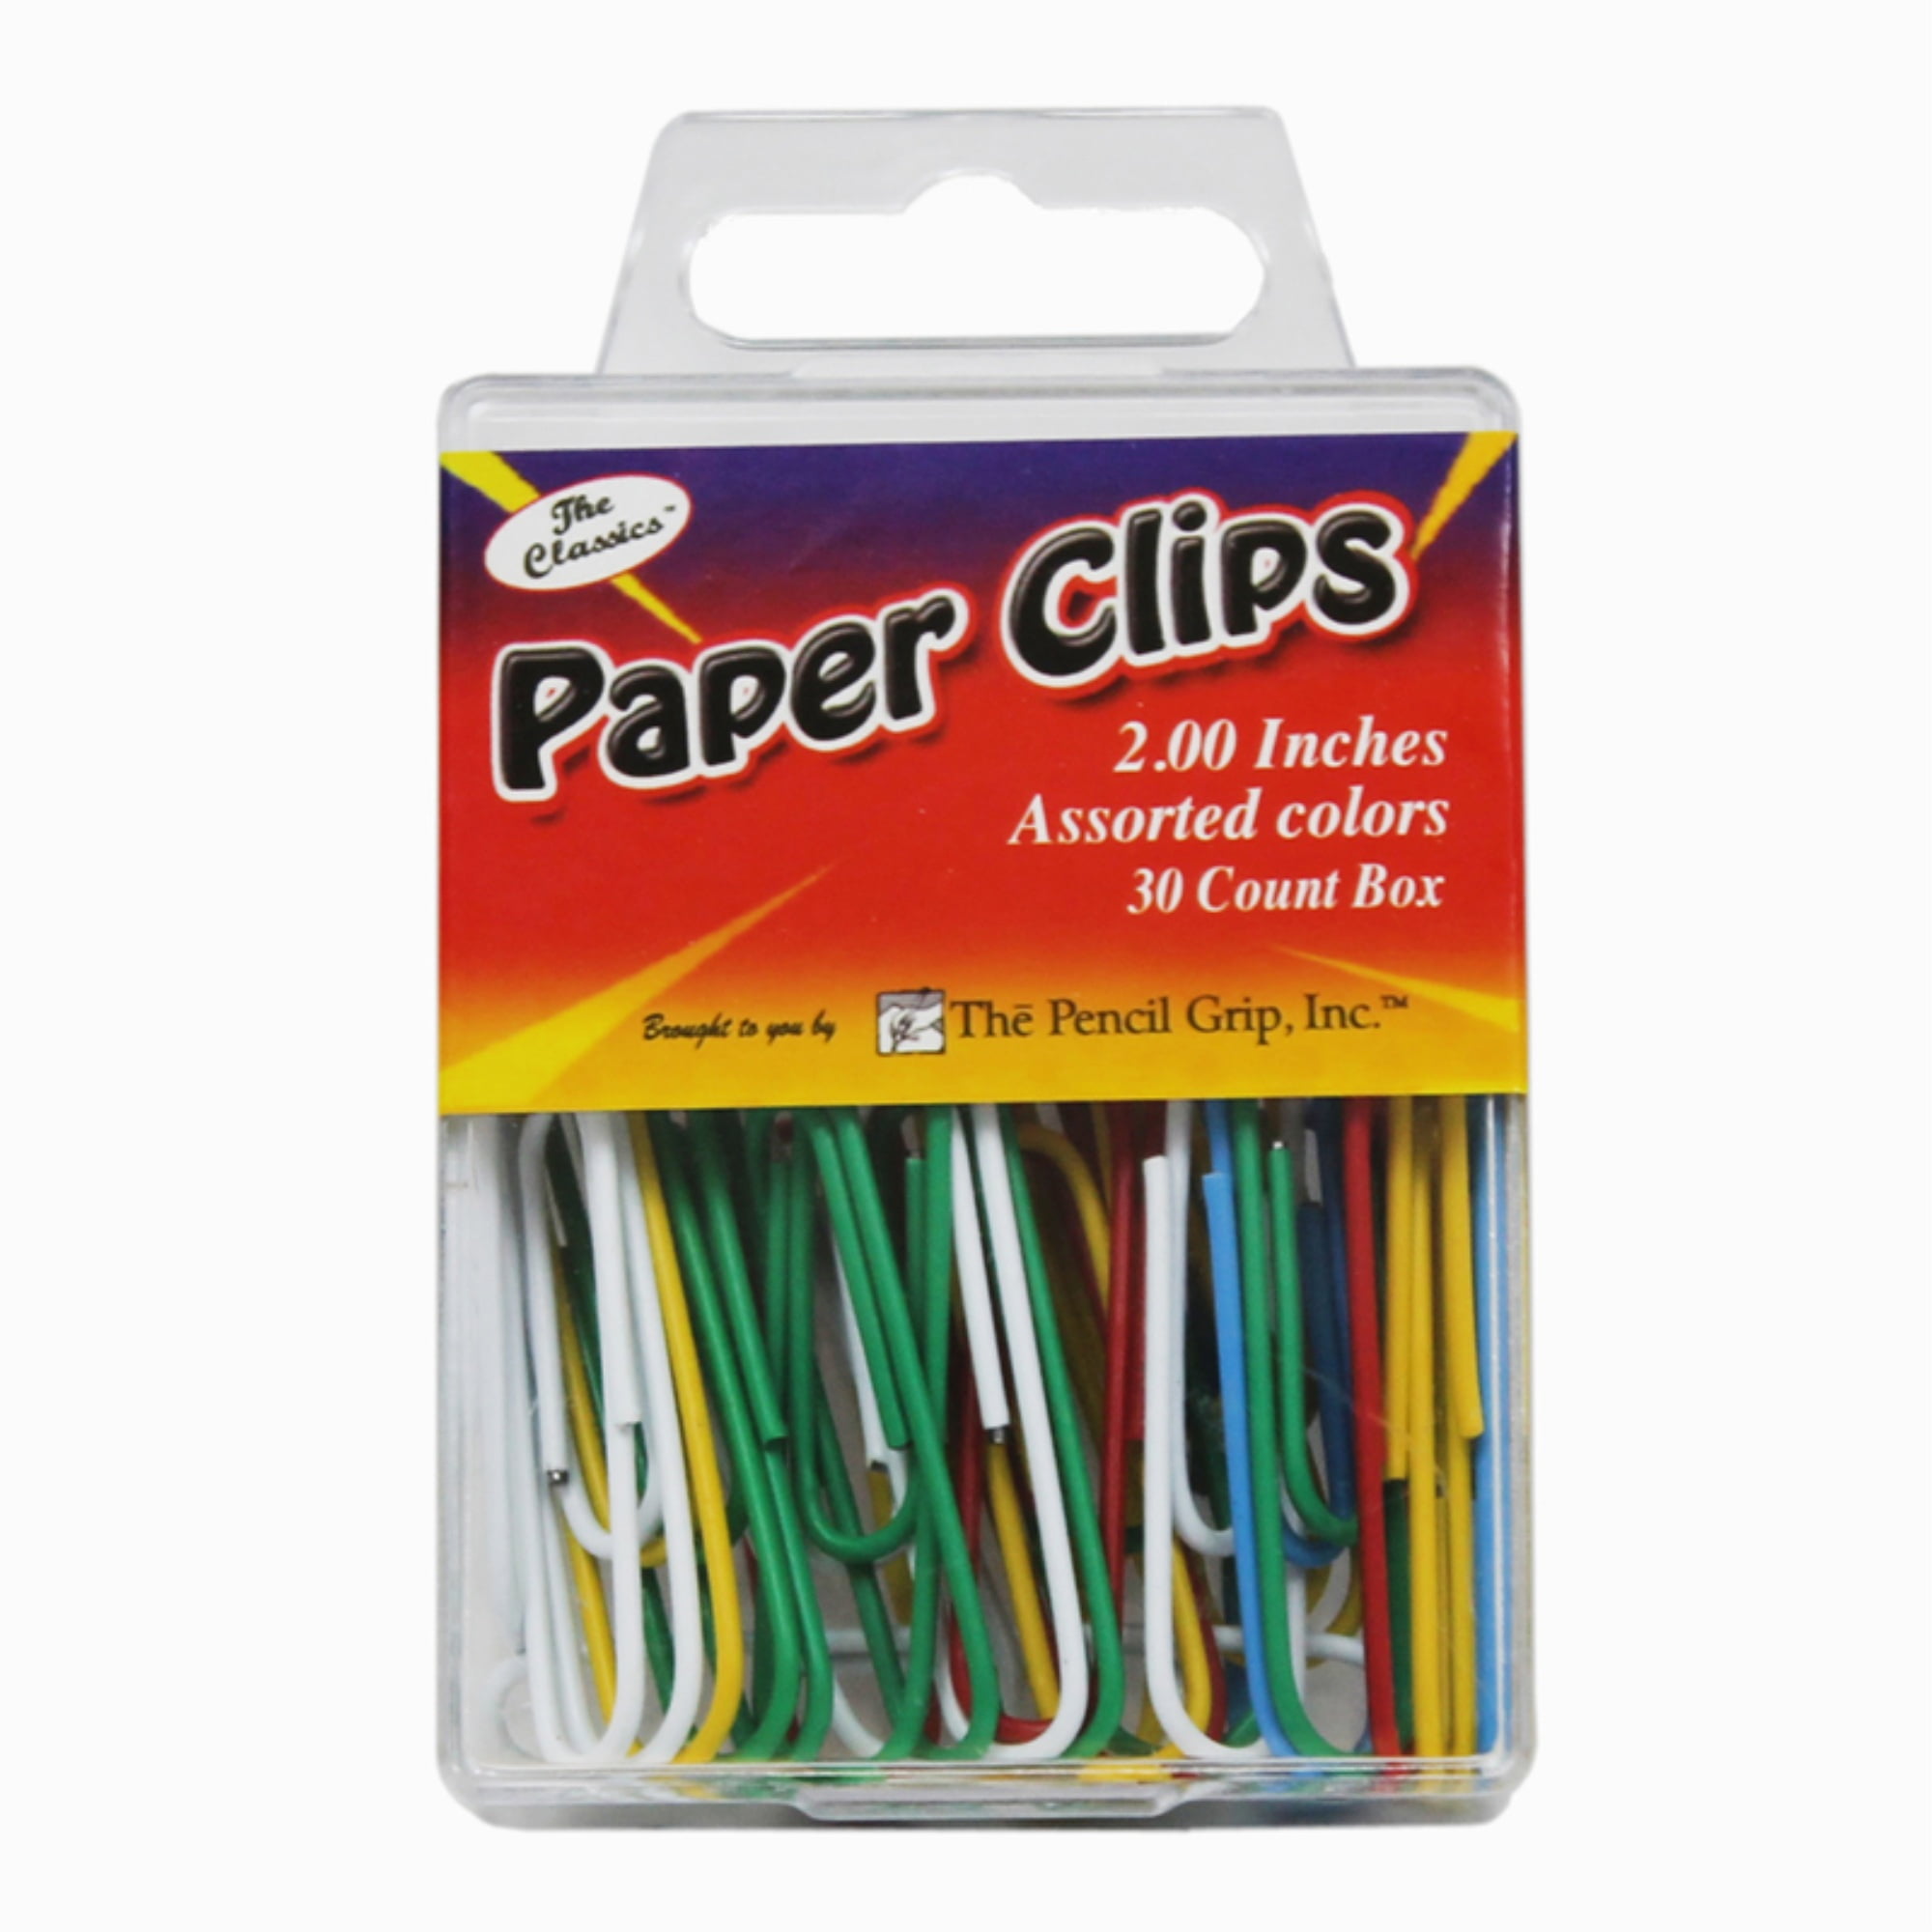 filofax notebook college block... 3x Giant PaperClips Paper clips for calendar